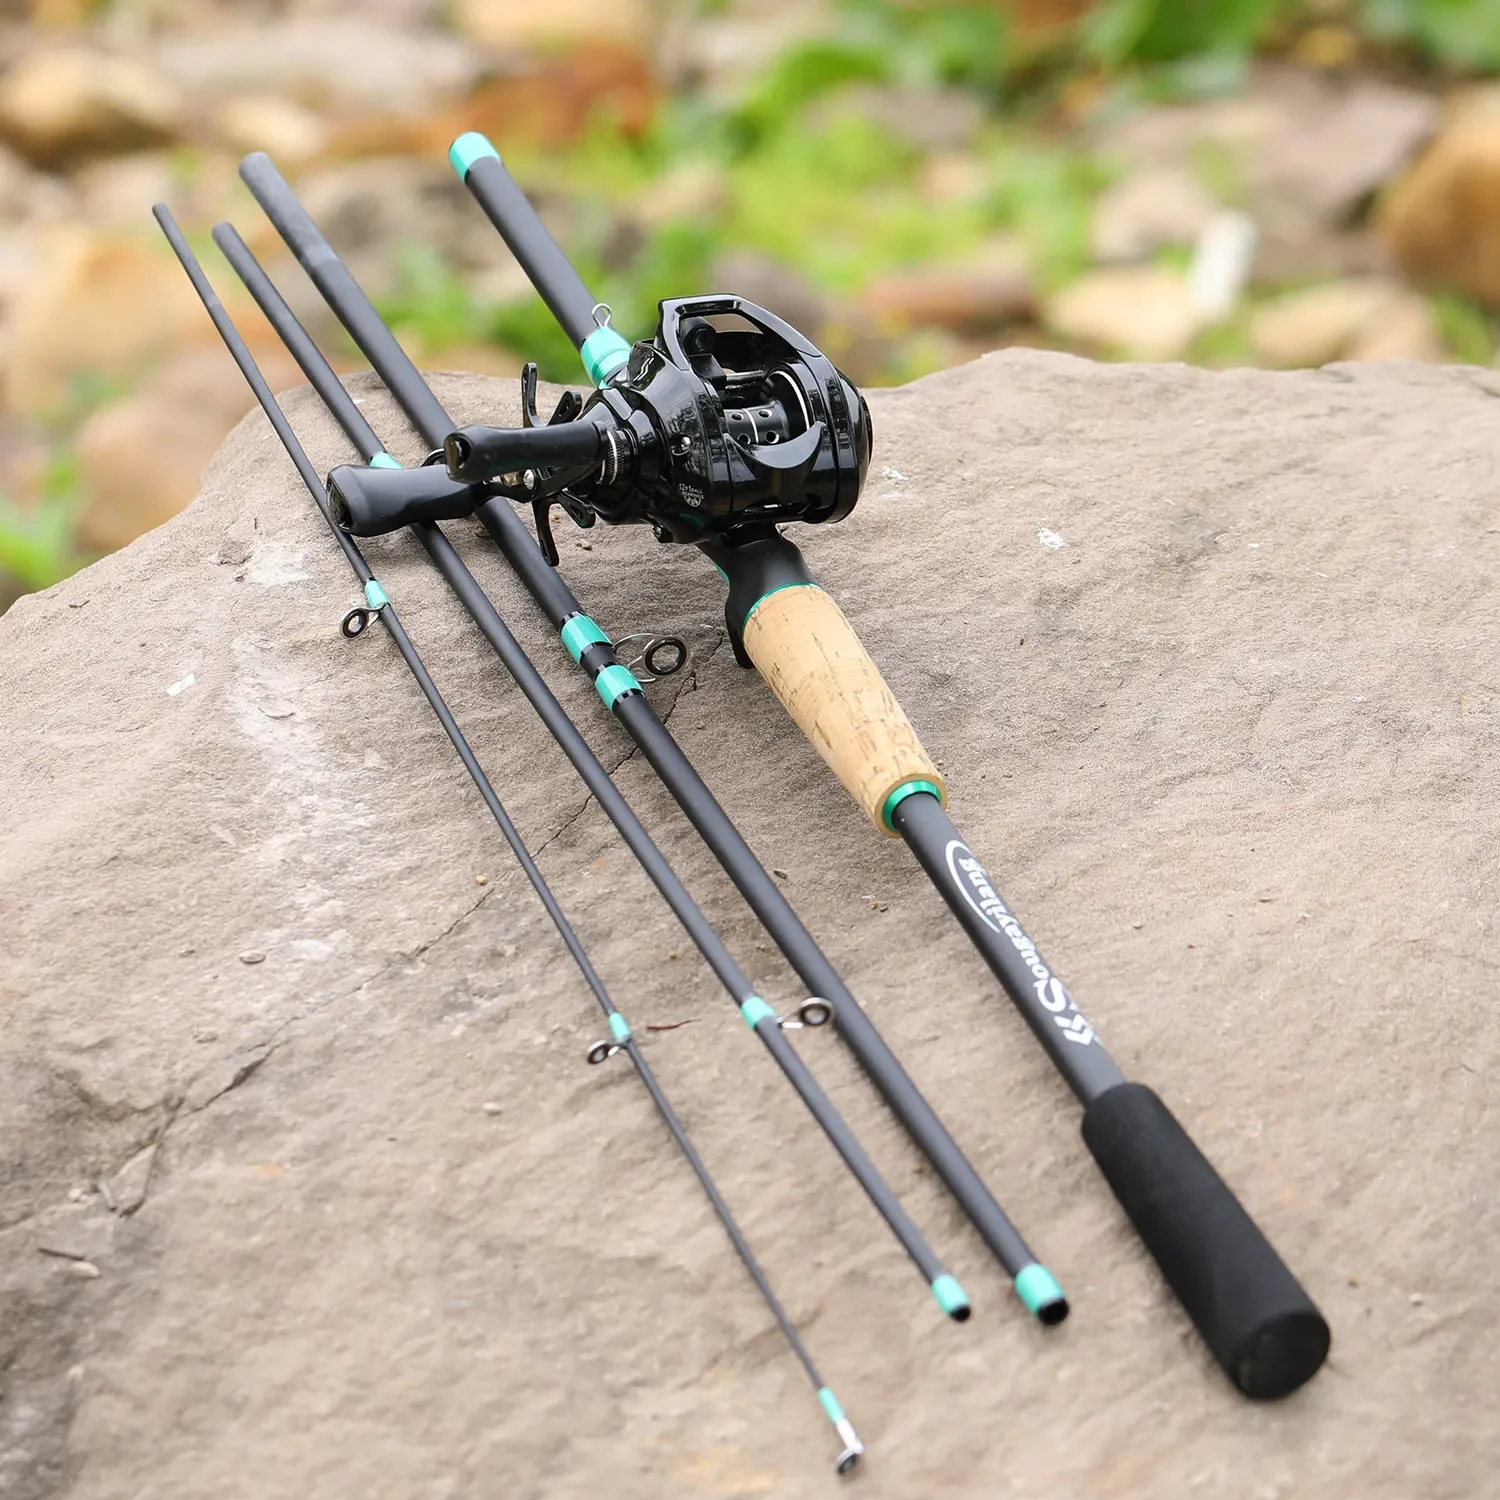 Sougayilang Baitcasting Fishing Rod and Reel Full Set 4sections Carbon Rod  and 7.2:1 Gear Ratio Reel for Freshwater Bass Fishing